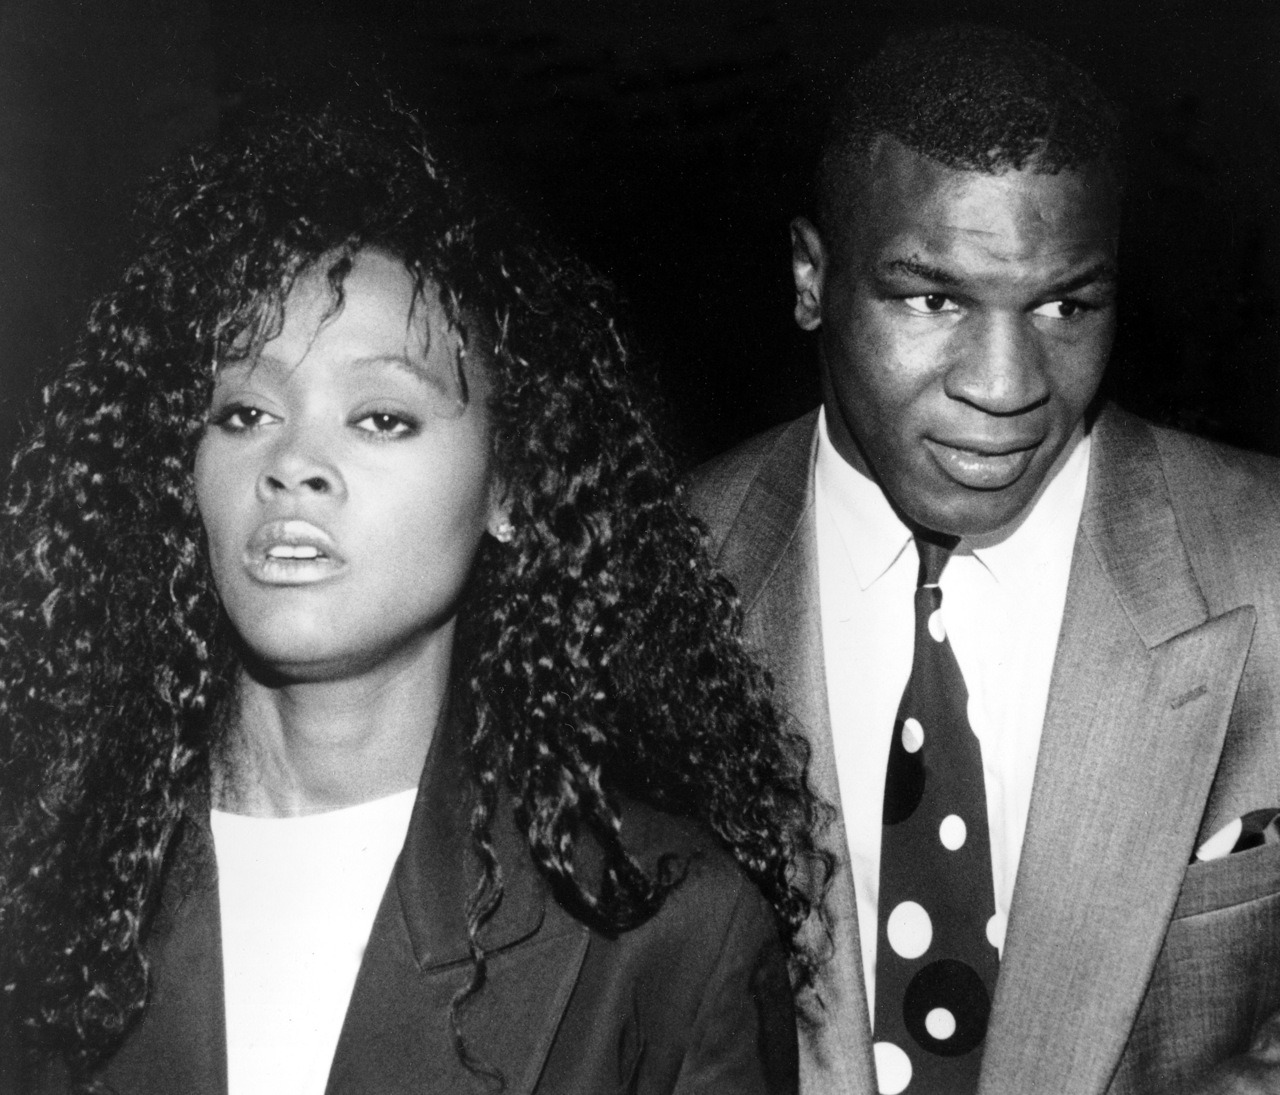 BACK IN THE DAY | 10/7/88 | Robin Givens files for divorce after 8-month marriage